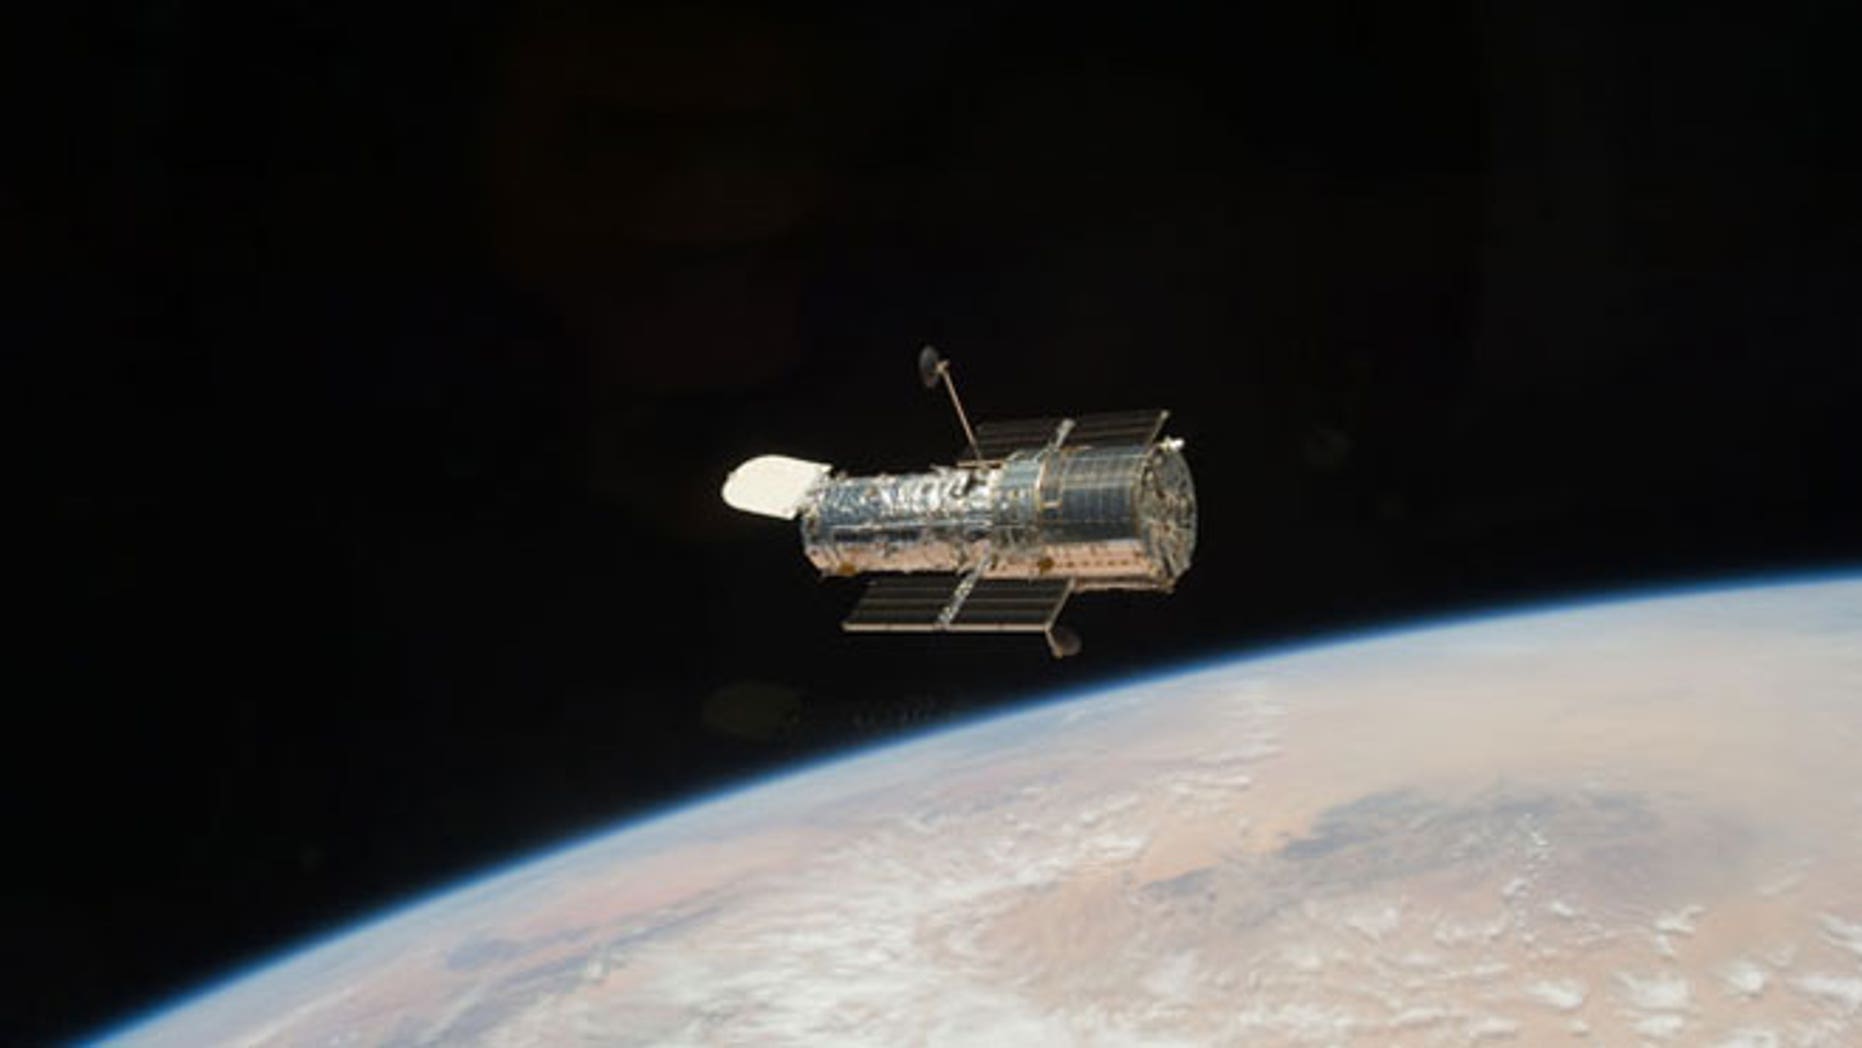 hubble space telescope images to print